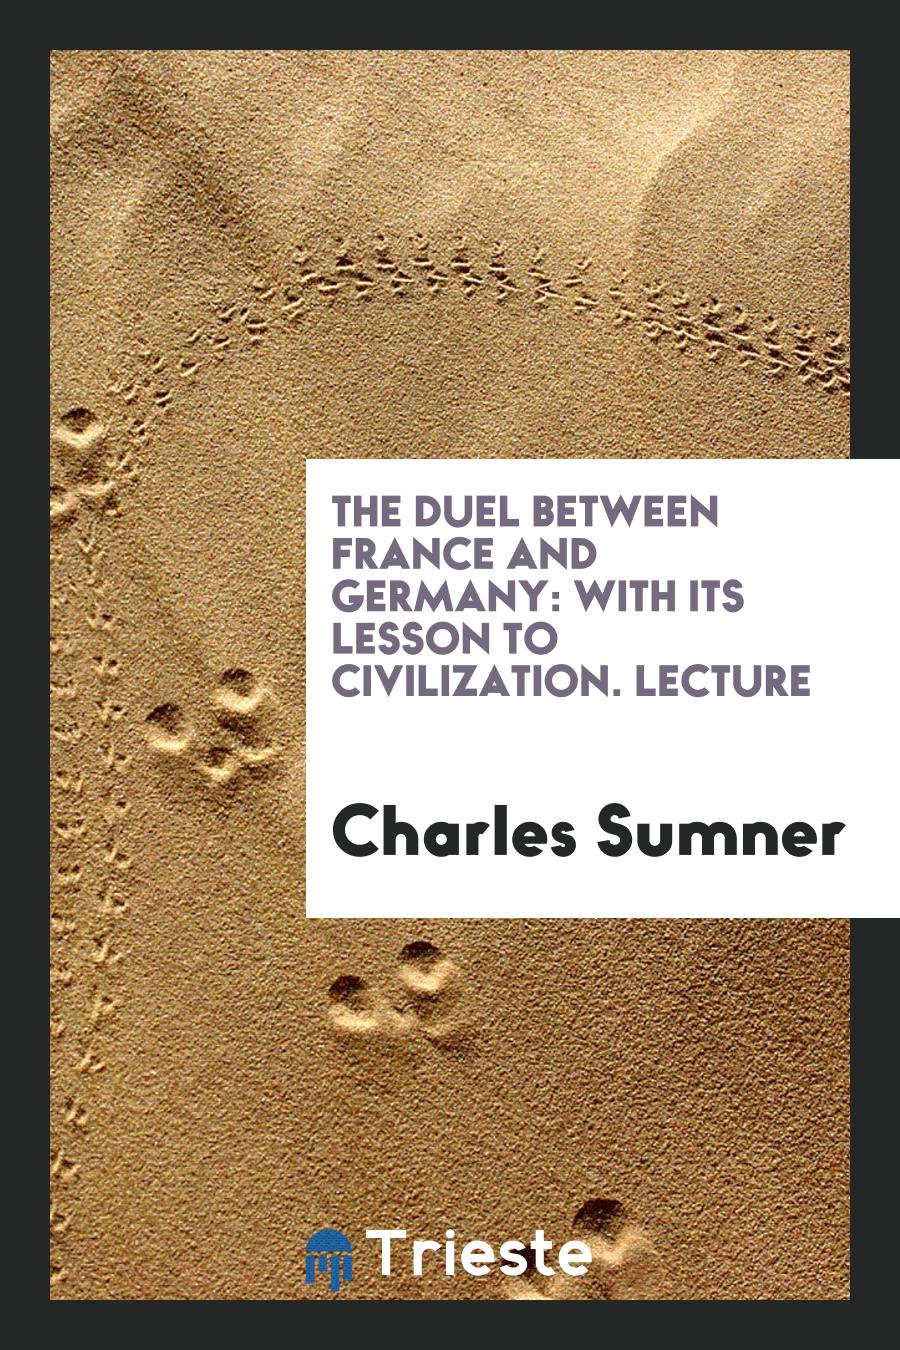 The Duel Between France and Germany: With Its Lesson to Civilization. Lecture